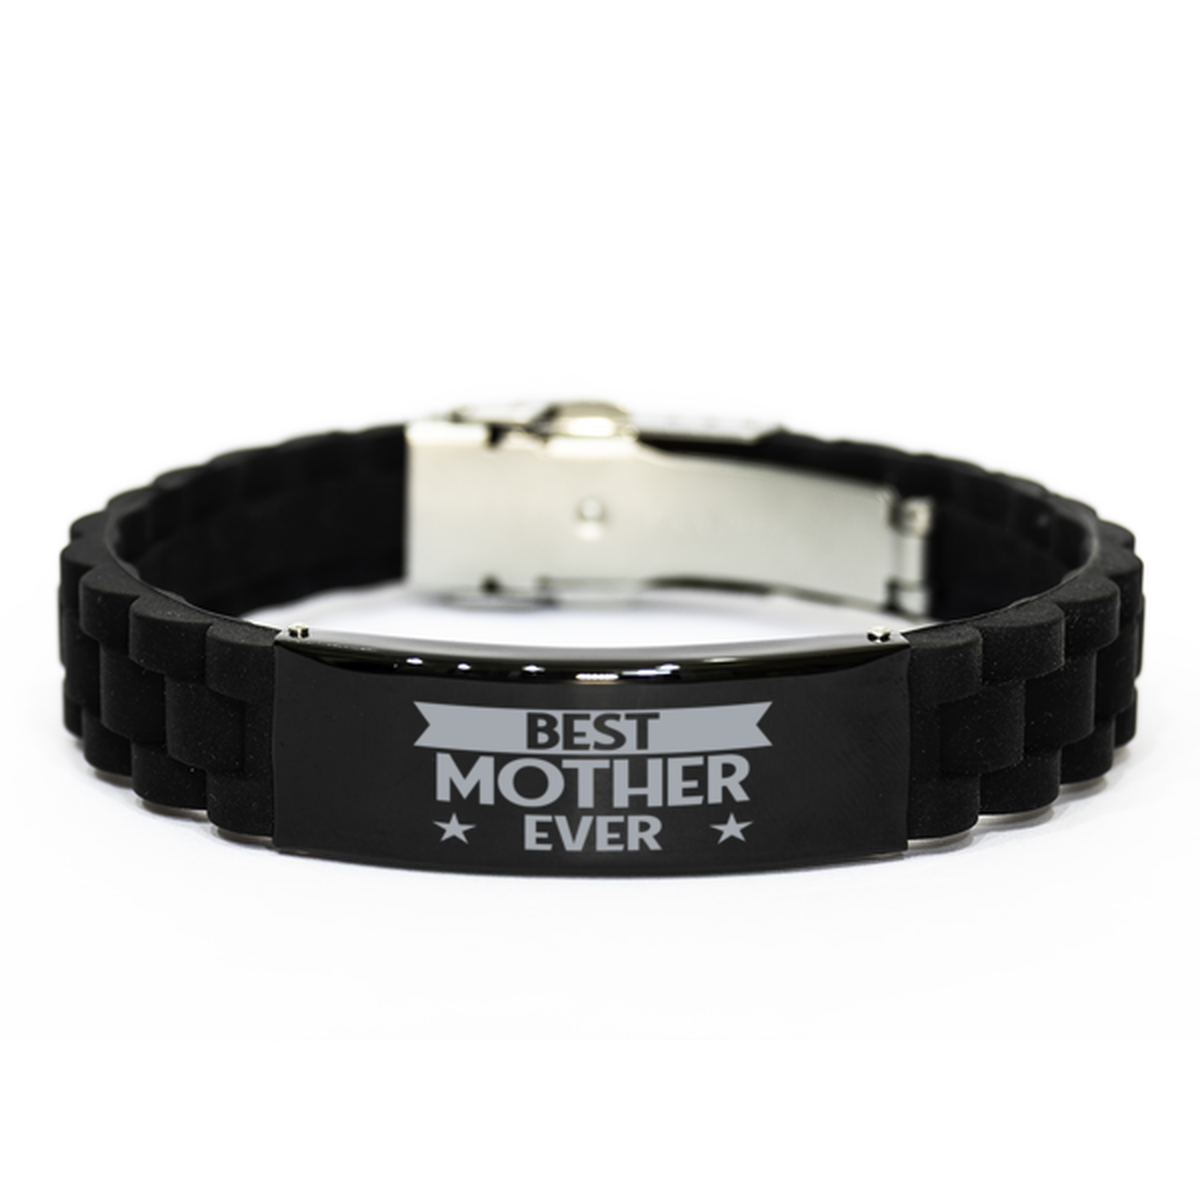 Best Mother Ever Mother Gifts, Funny Black Engraved Bracelet For Mother, Family Gifts For Women